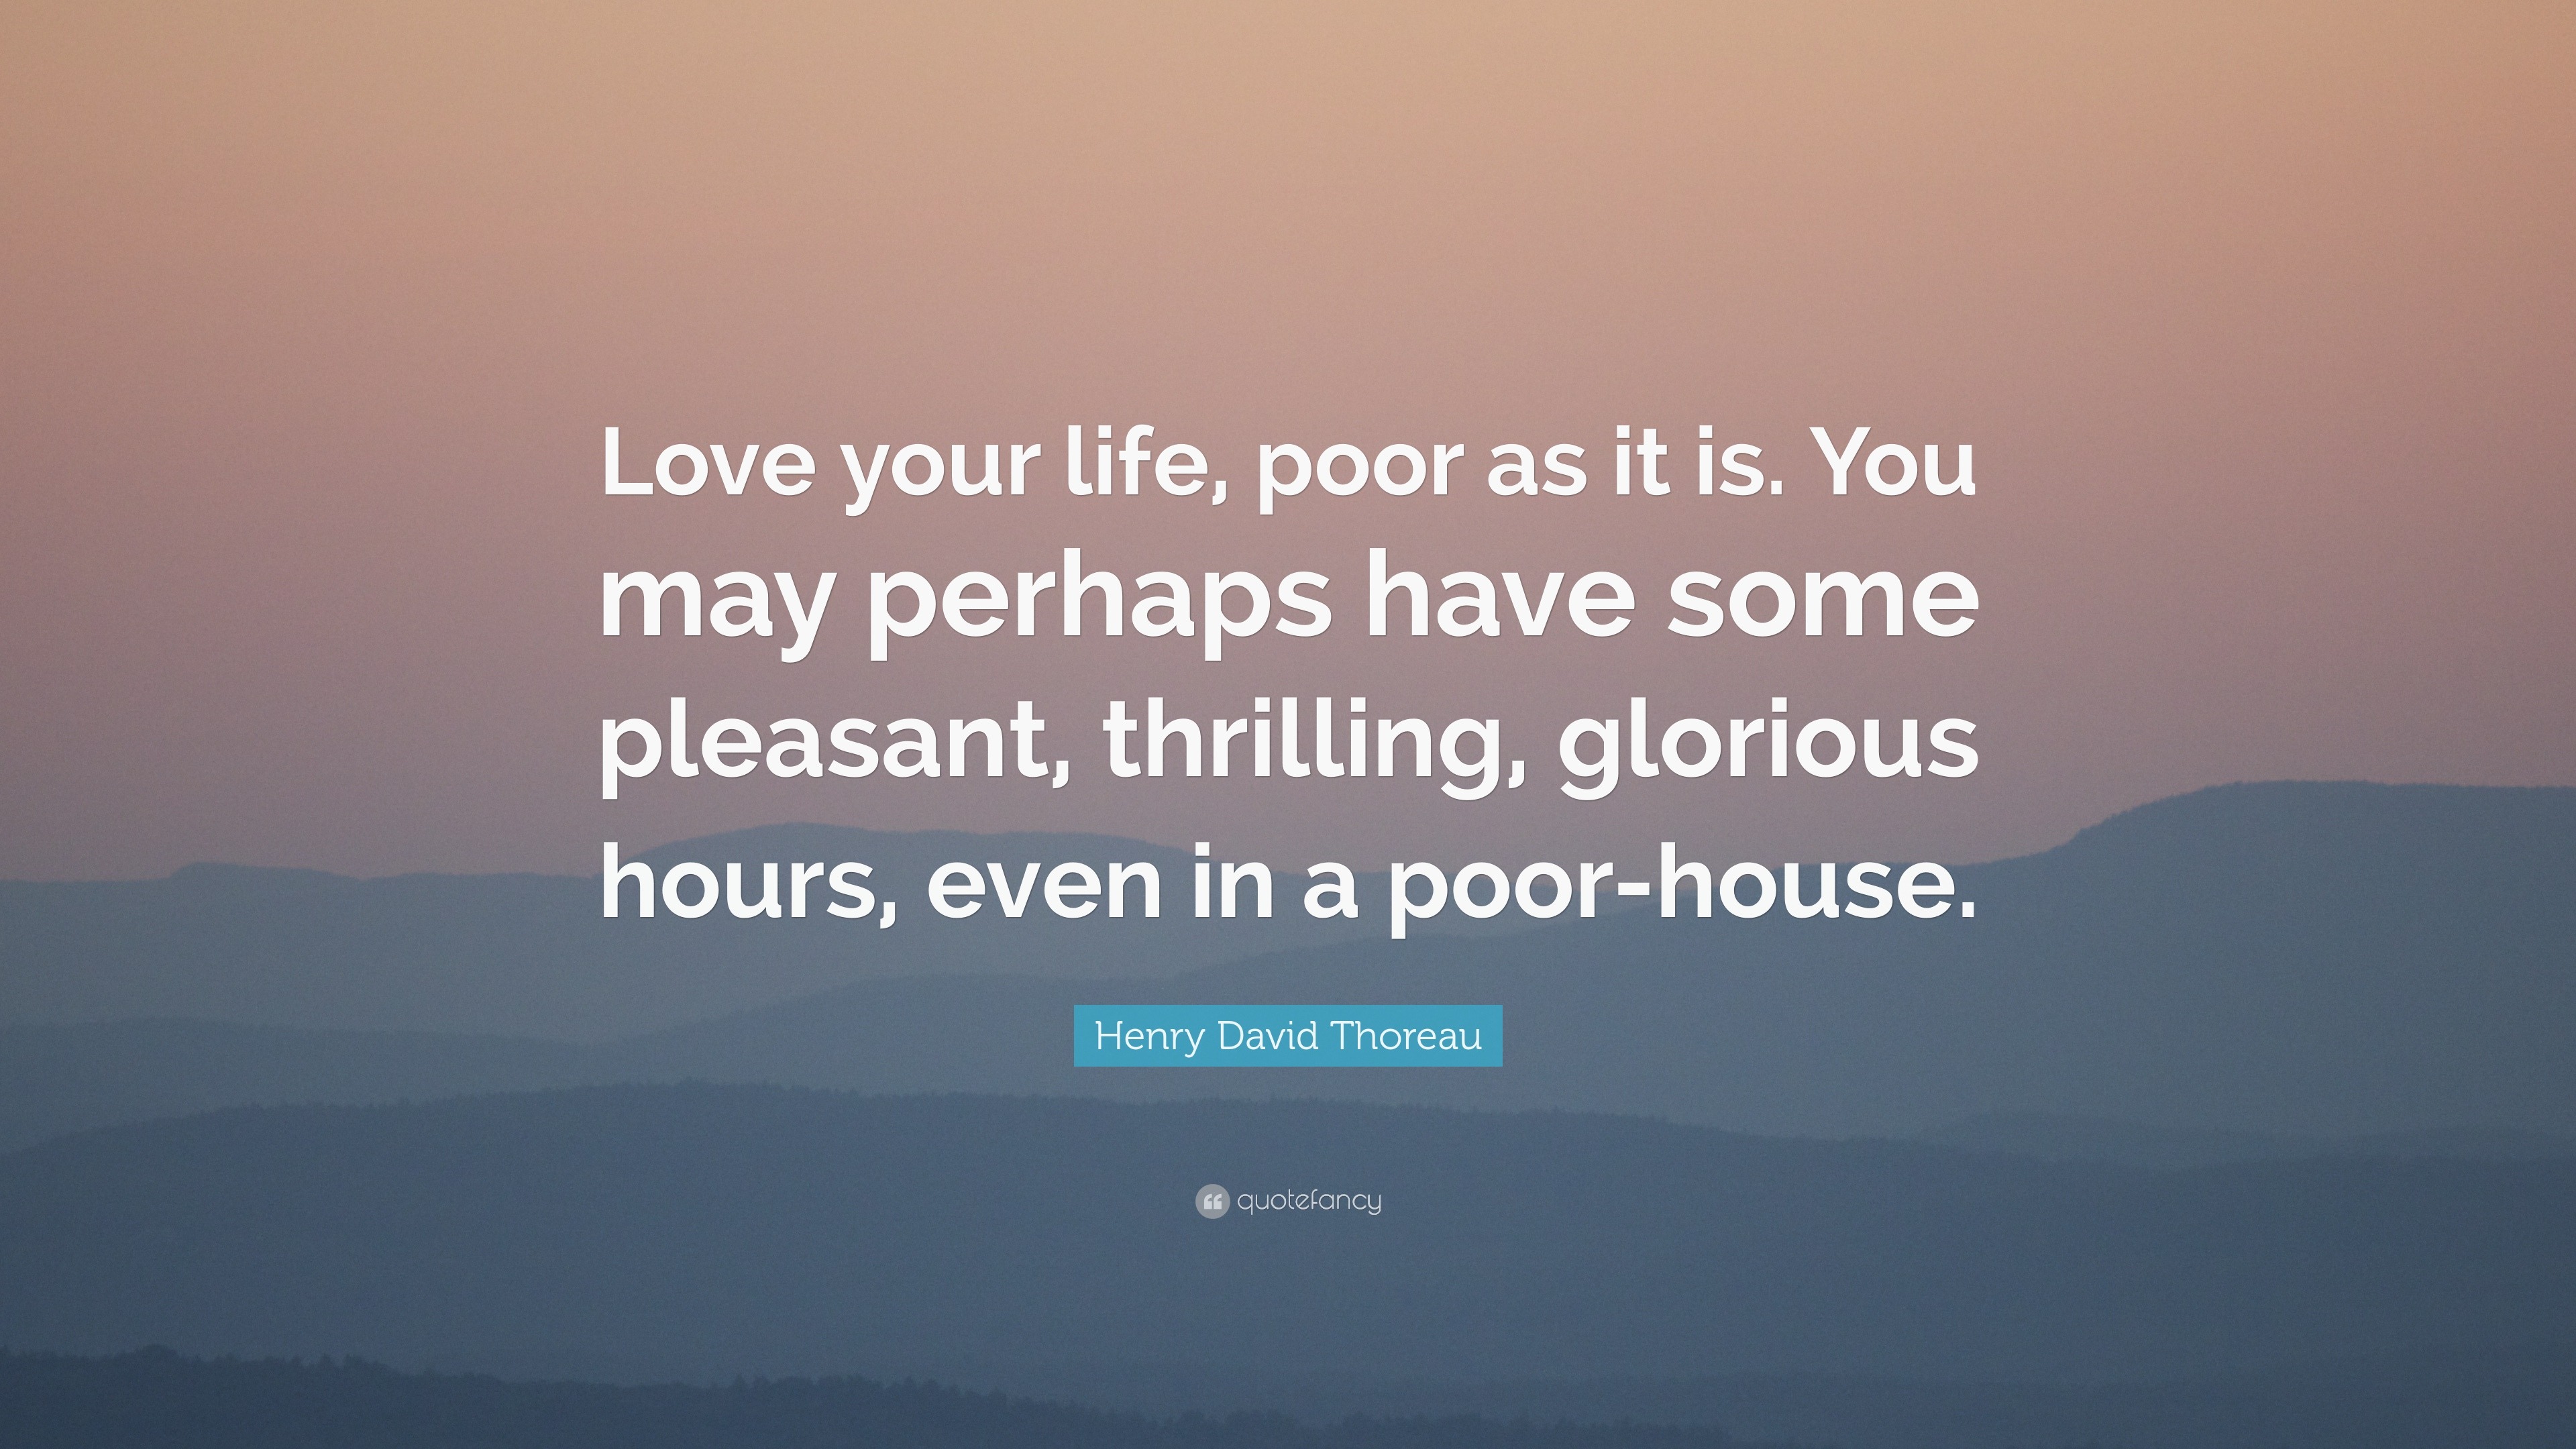 Henry David Thoreau Quote: “Love your life, poor as it is. You may